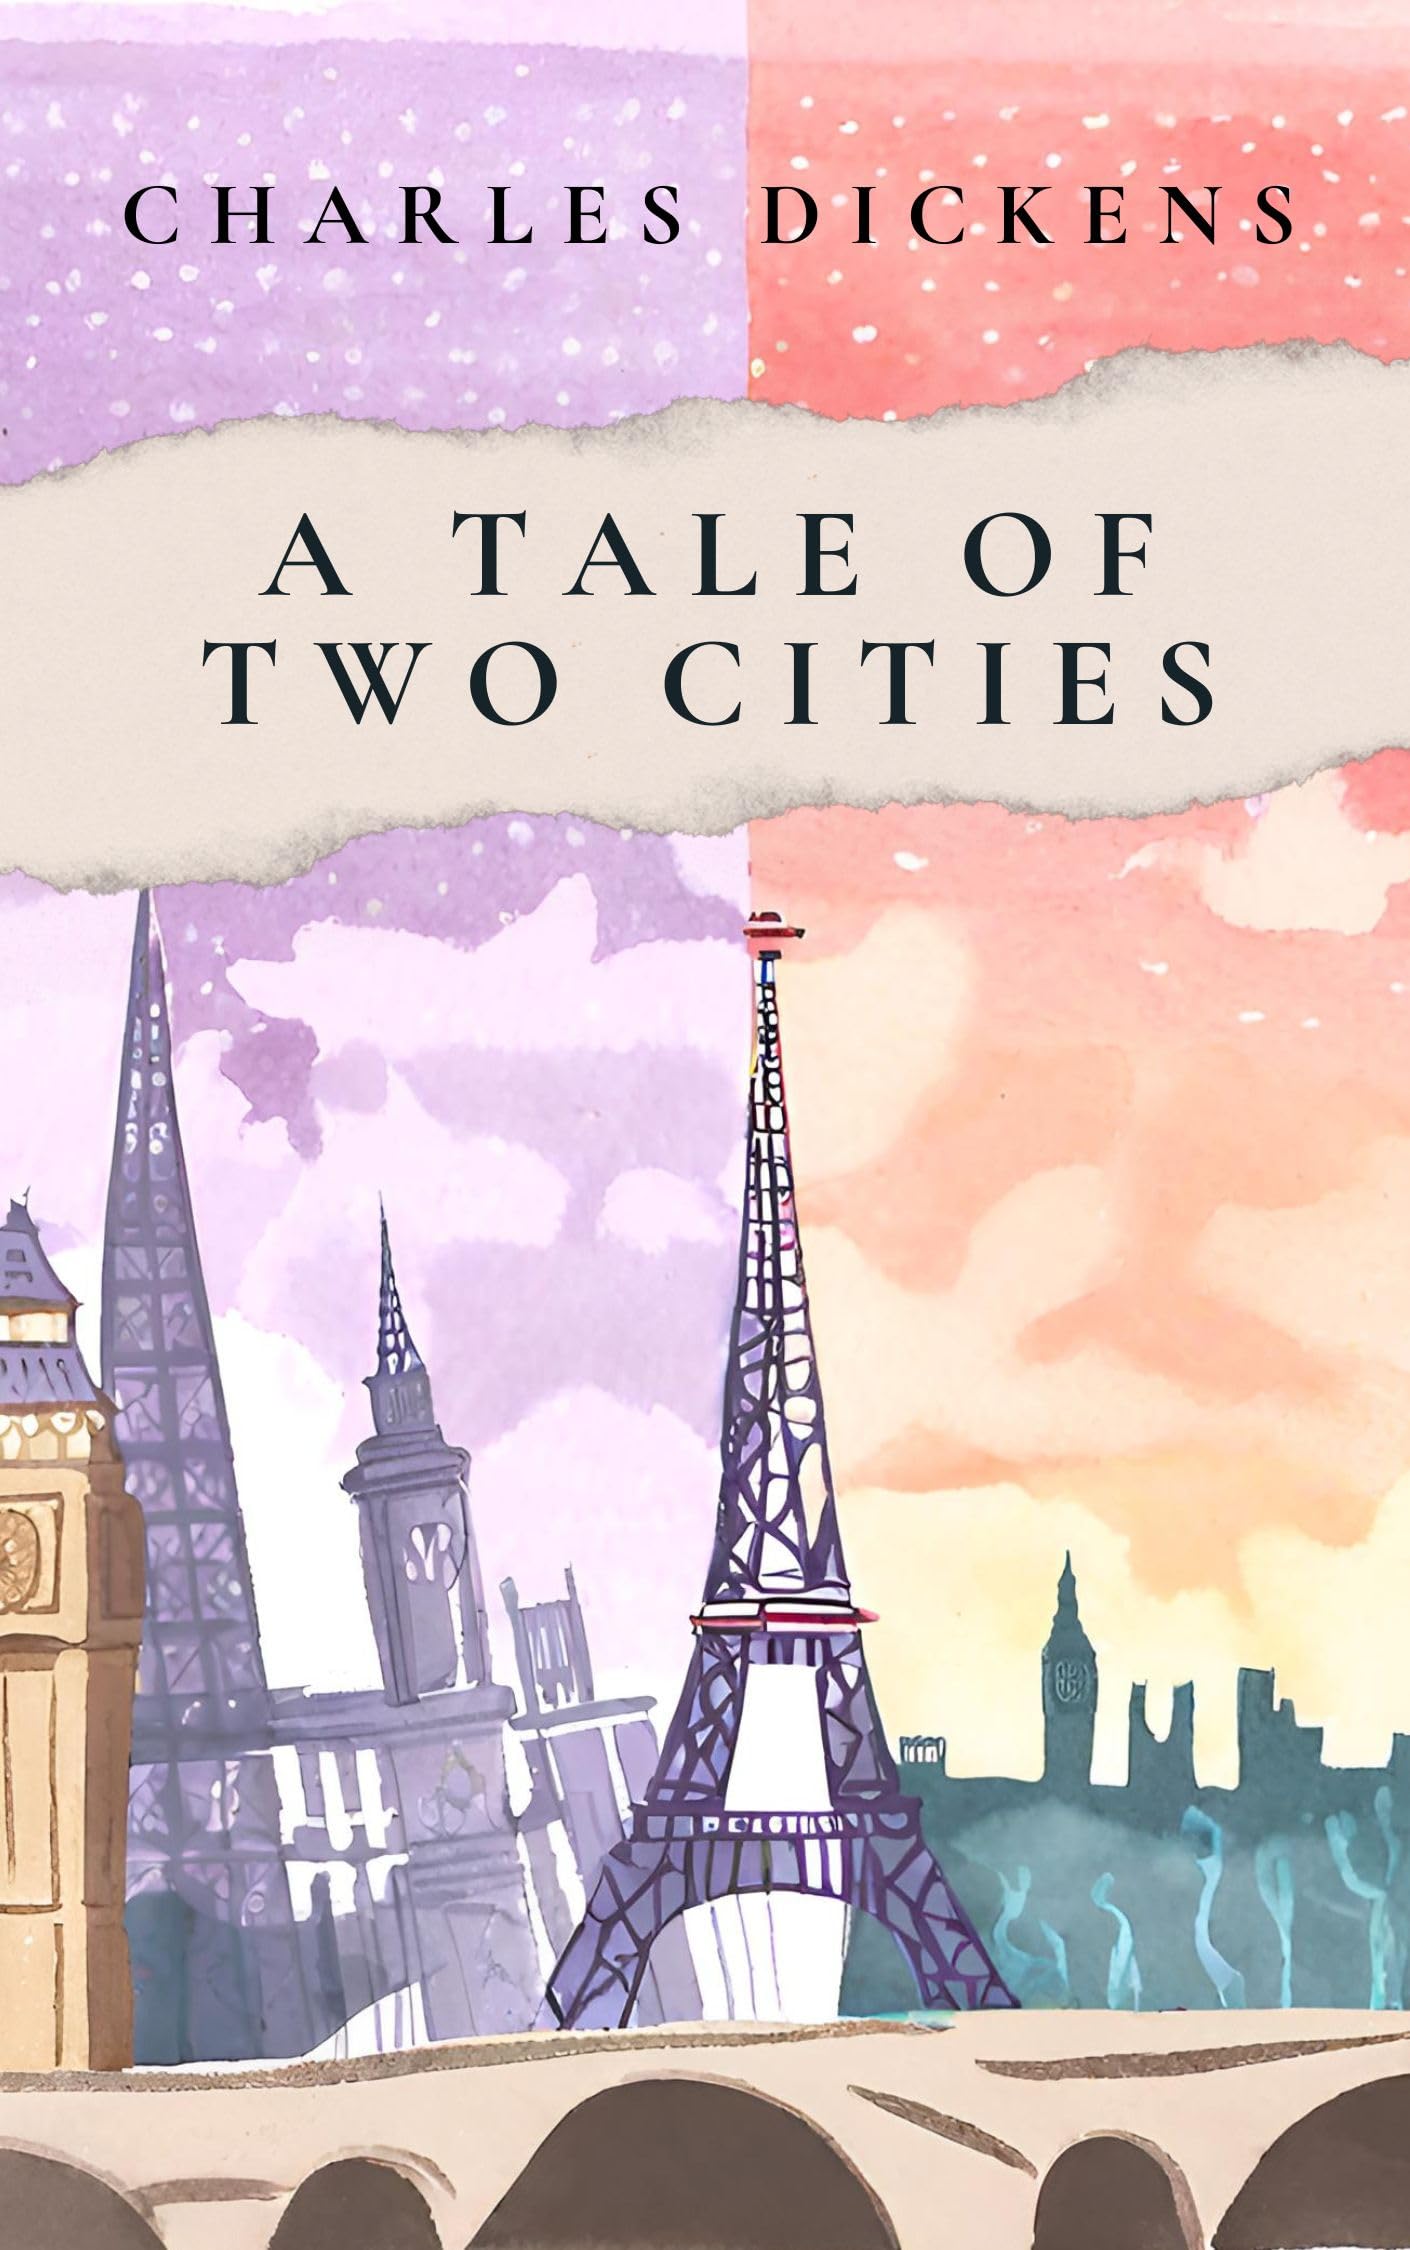 Charles Dickens A Tale of Two Cities. Original 1859 Edition. FREE KINDLE EDITION